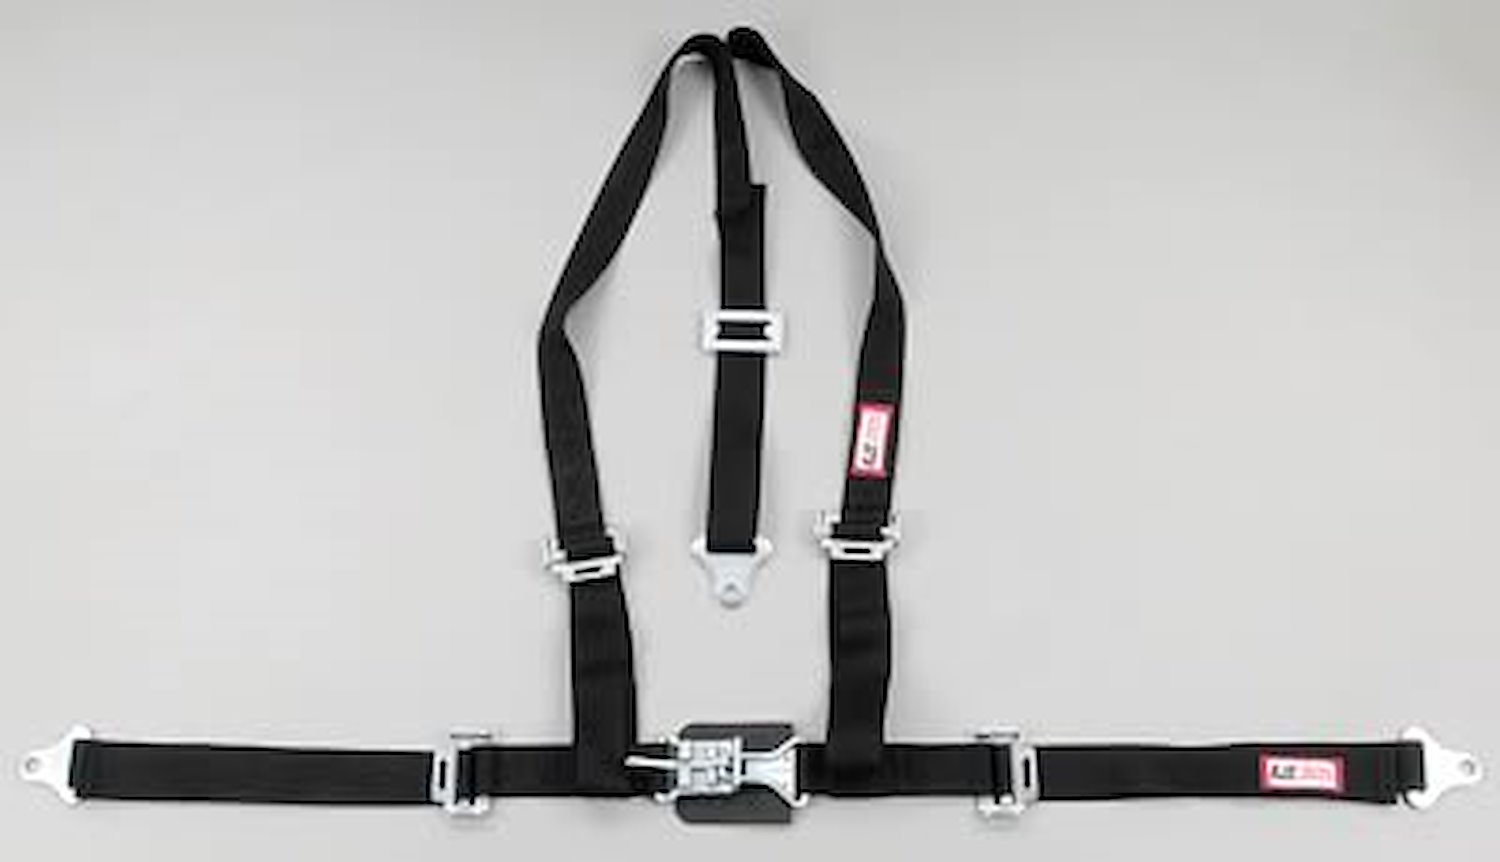 NON-SFI L&L HARNESS 2 PULL UP Lap Belt SNAP SEWN IN 2 S.H. Individual ROLL BAR Mount WRAP/SNAP BLACK